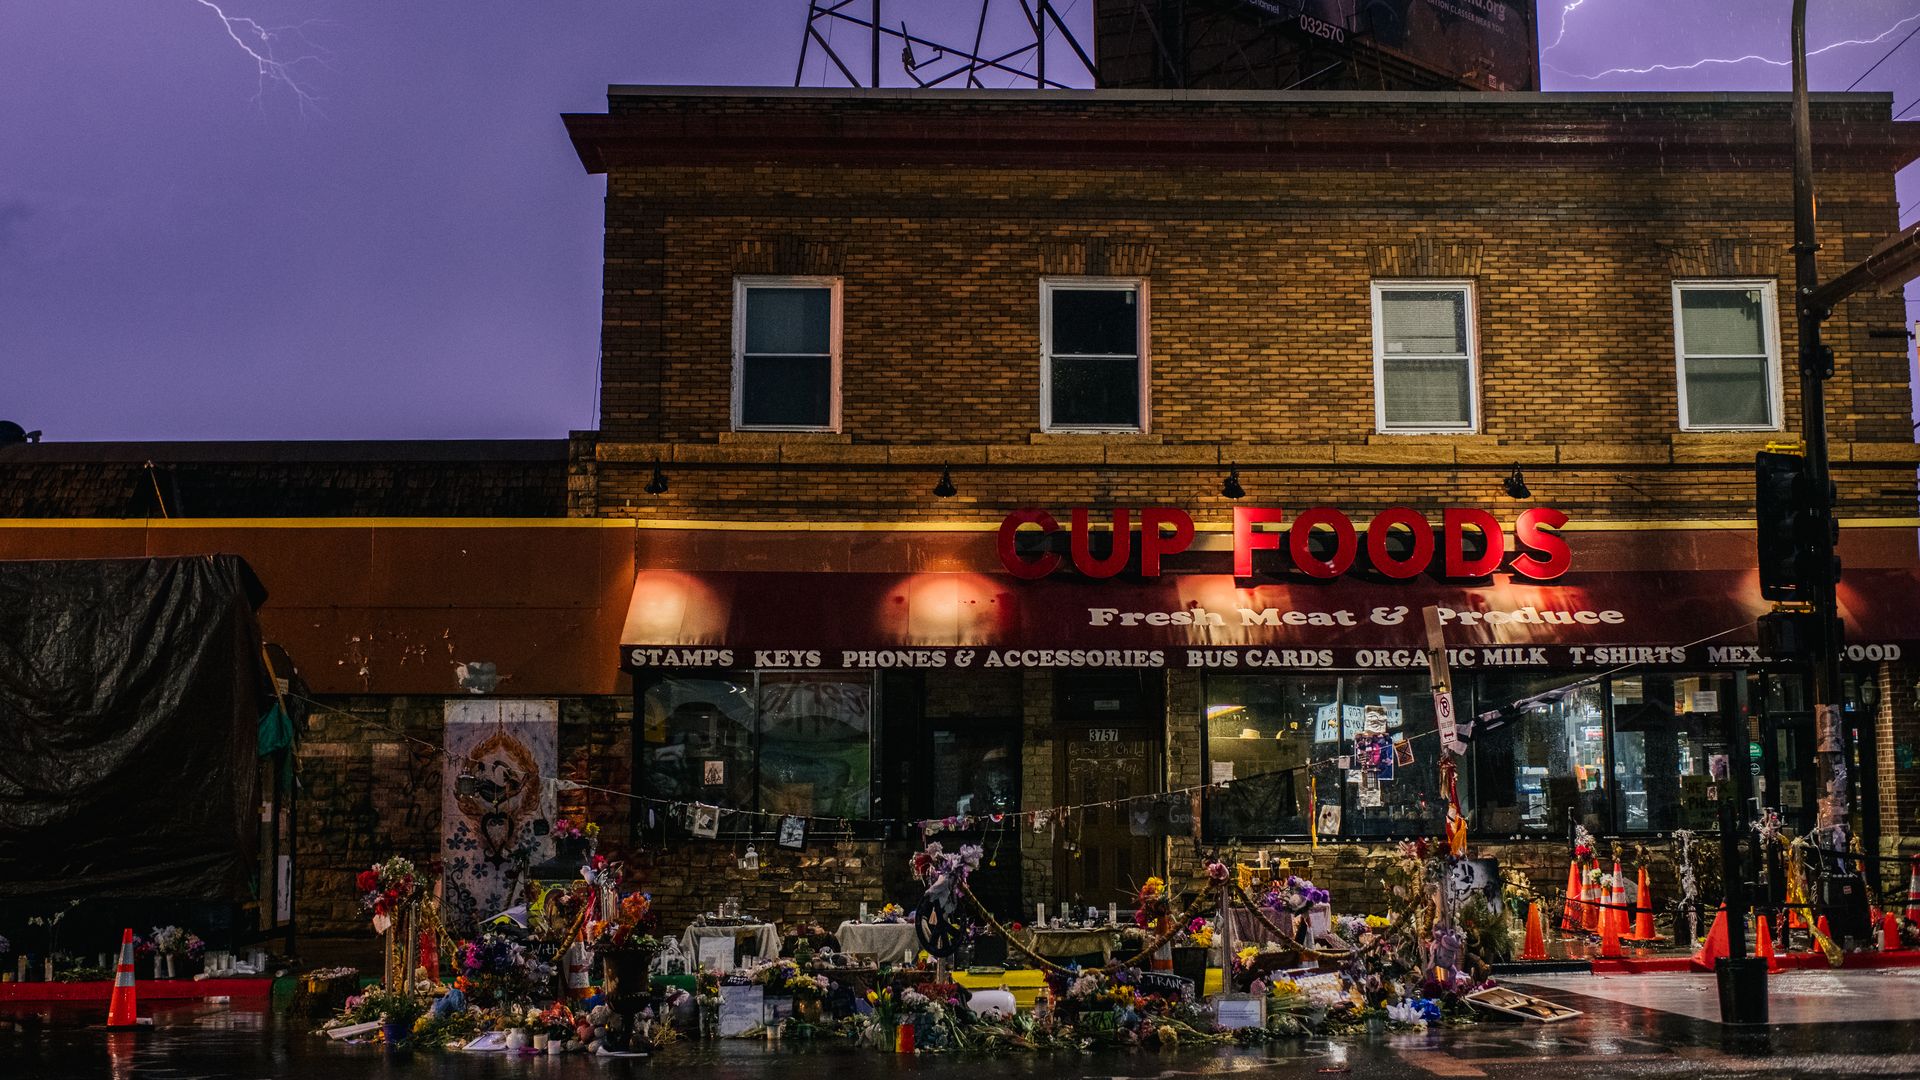 The entrance of Cup Foods, the site where George Floyd died, where people have laid flowers and signs.